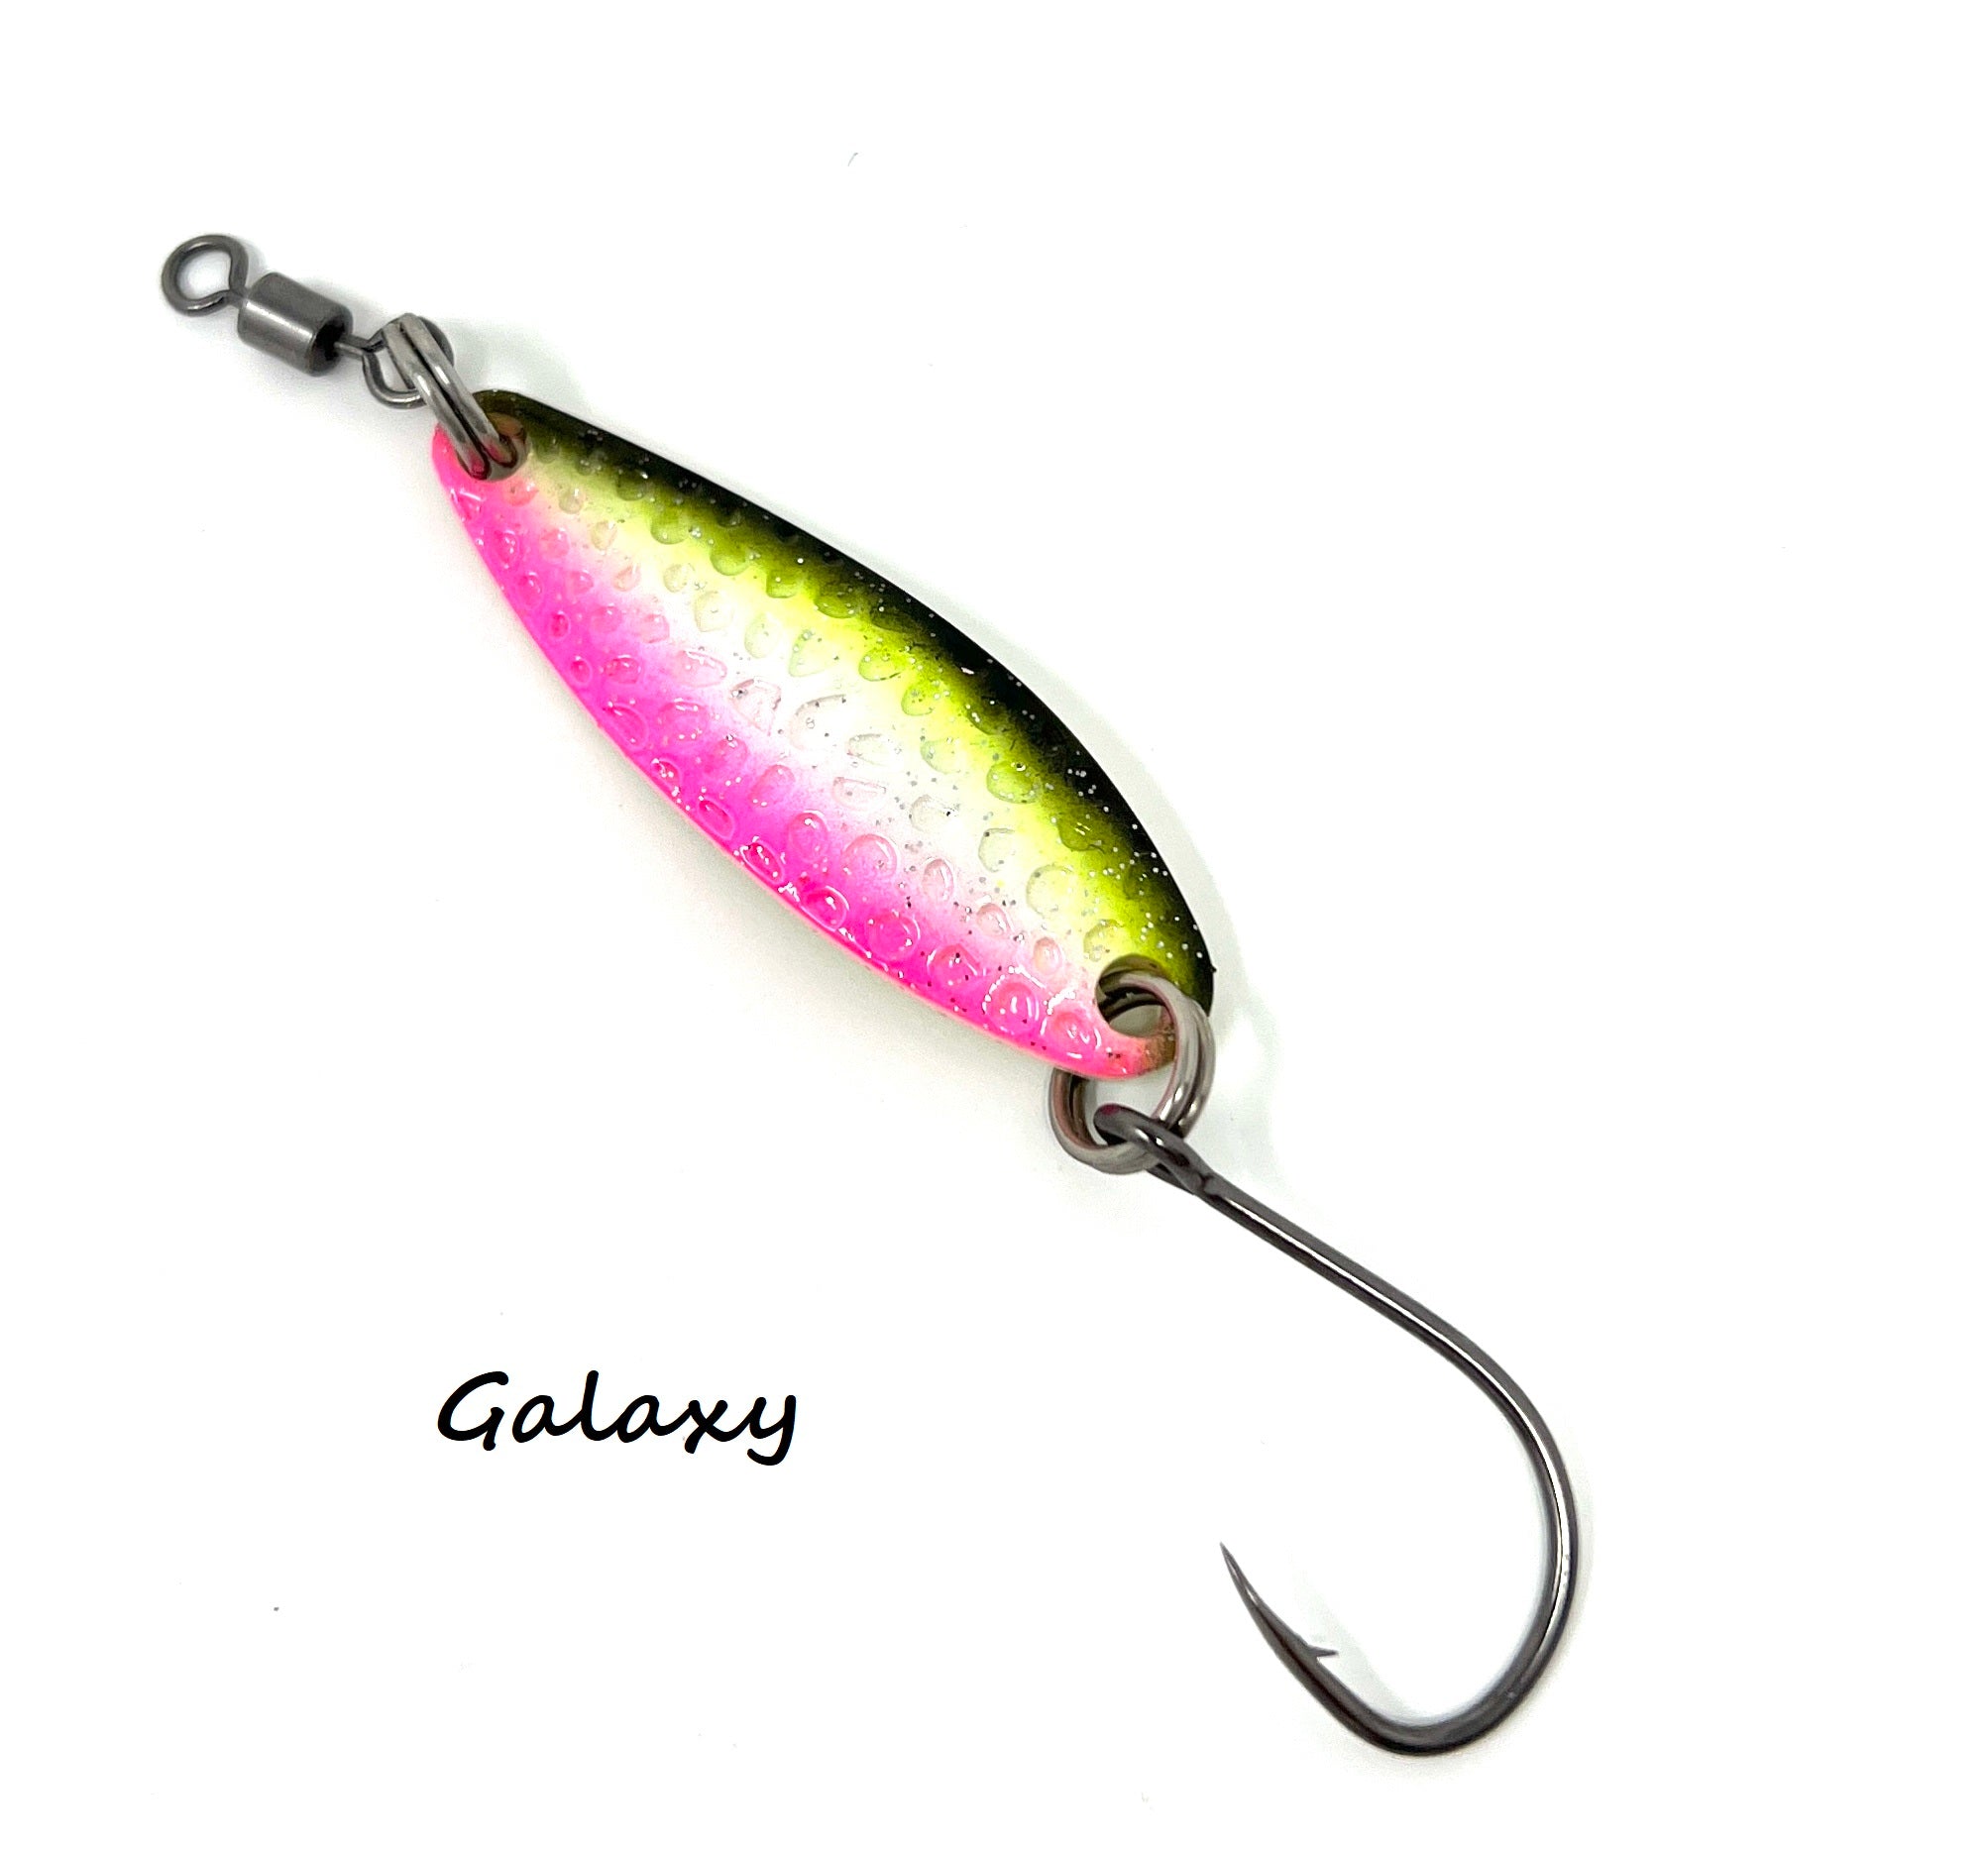 The Wiggler – Prime Lures Co.